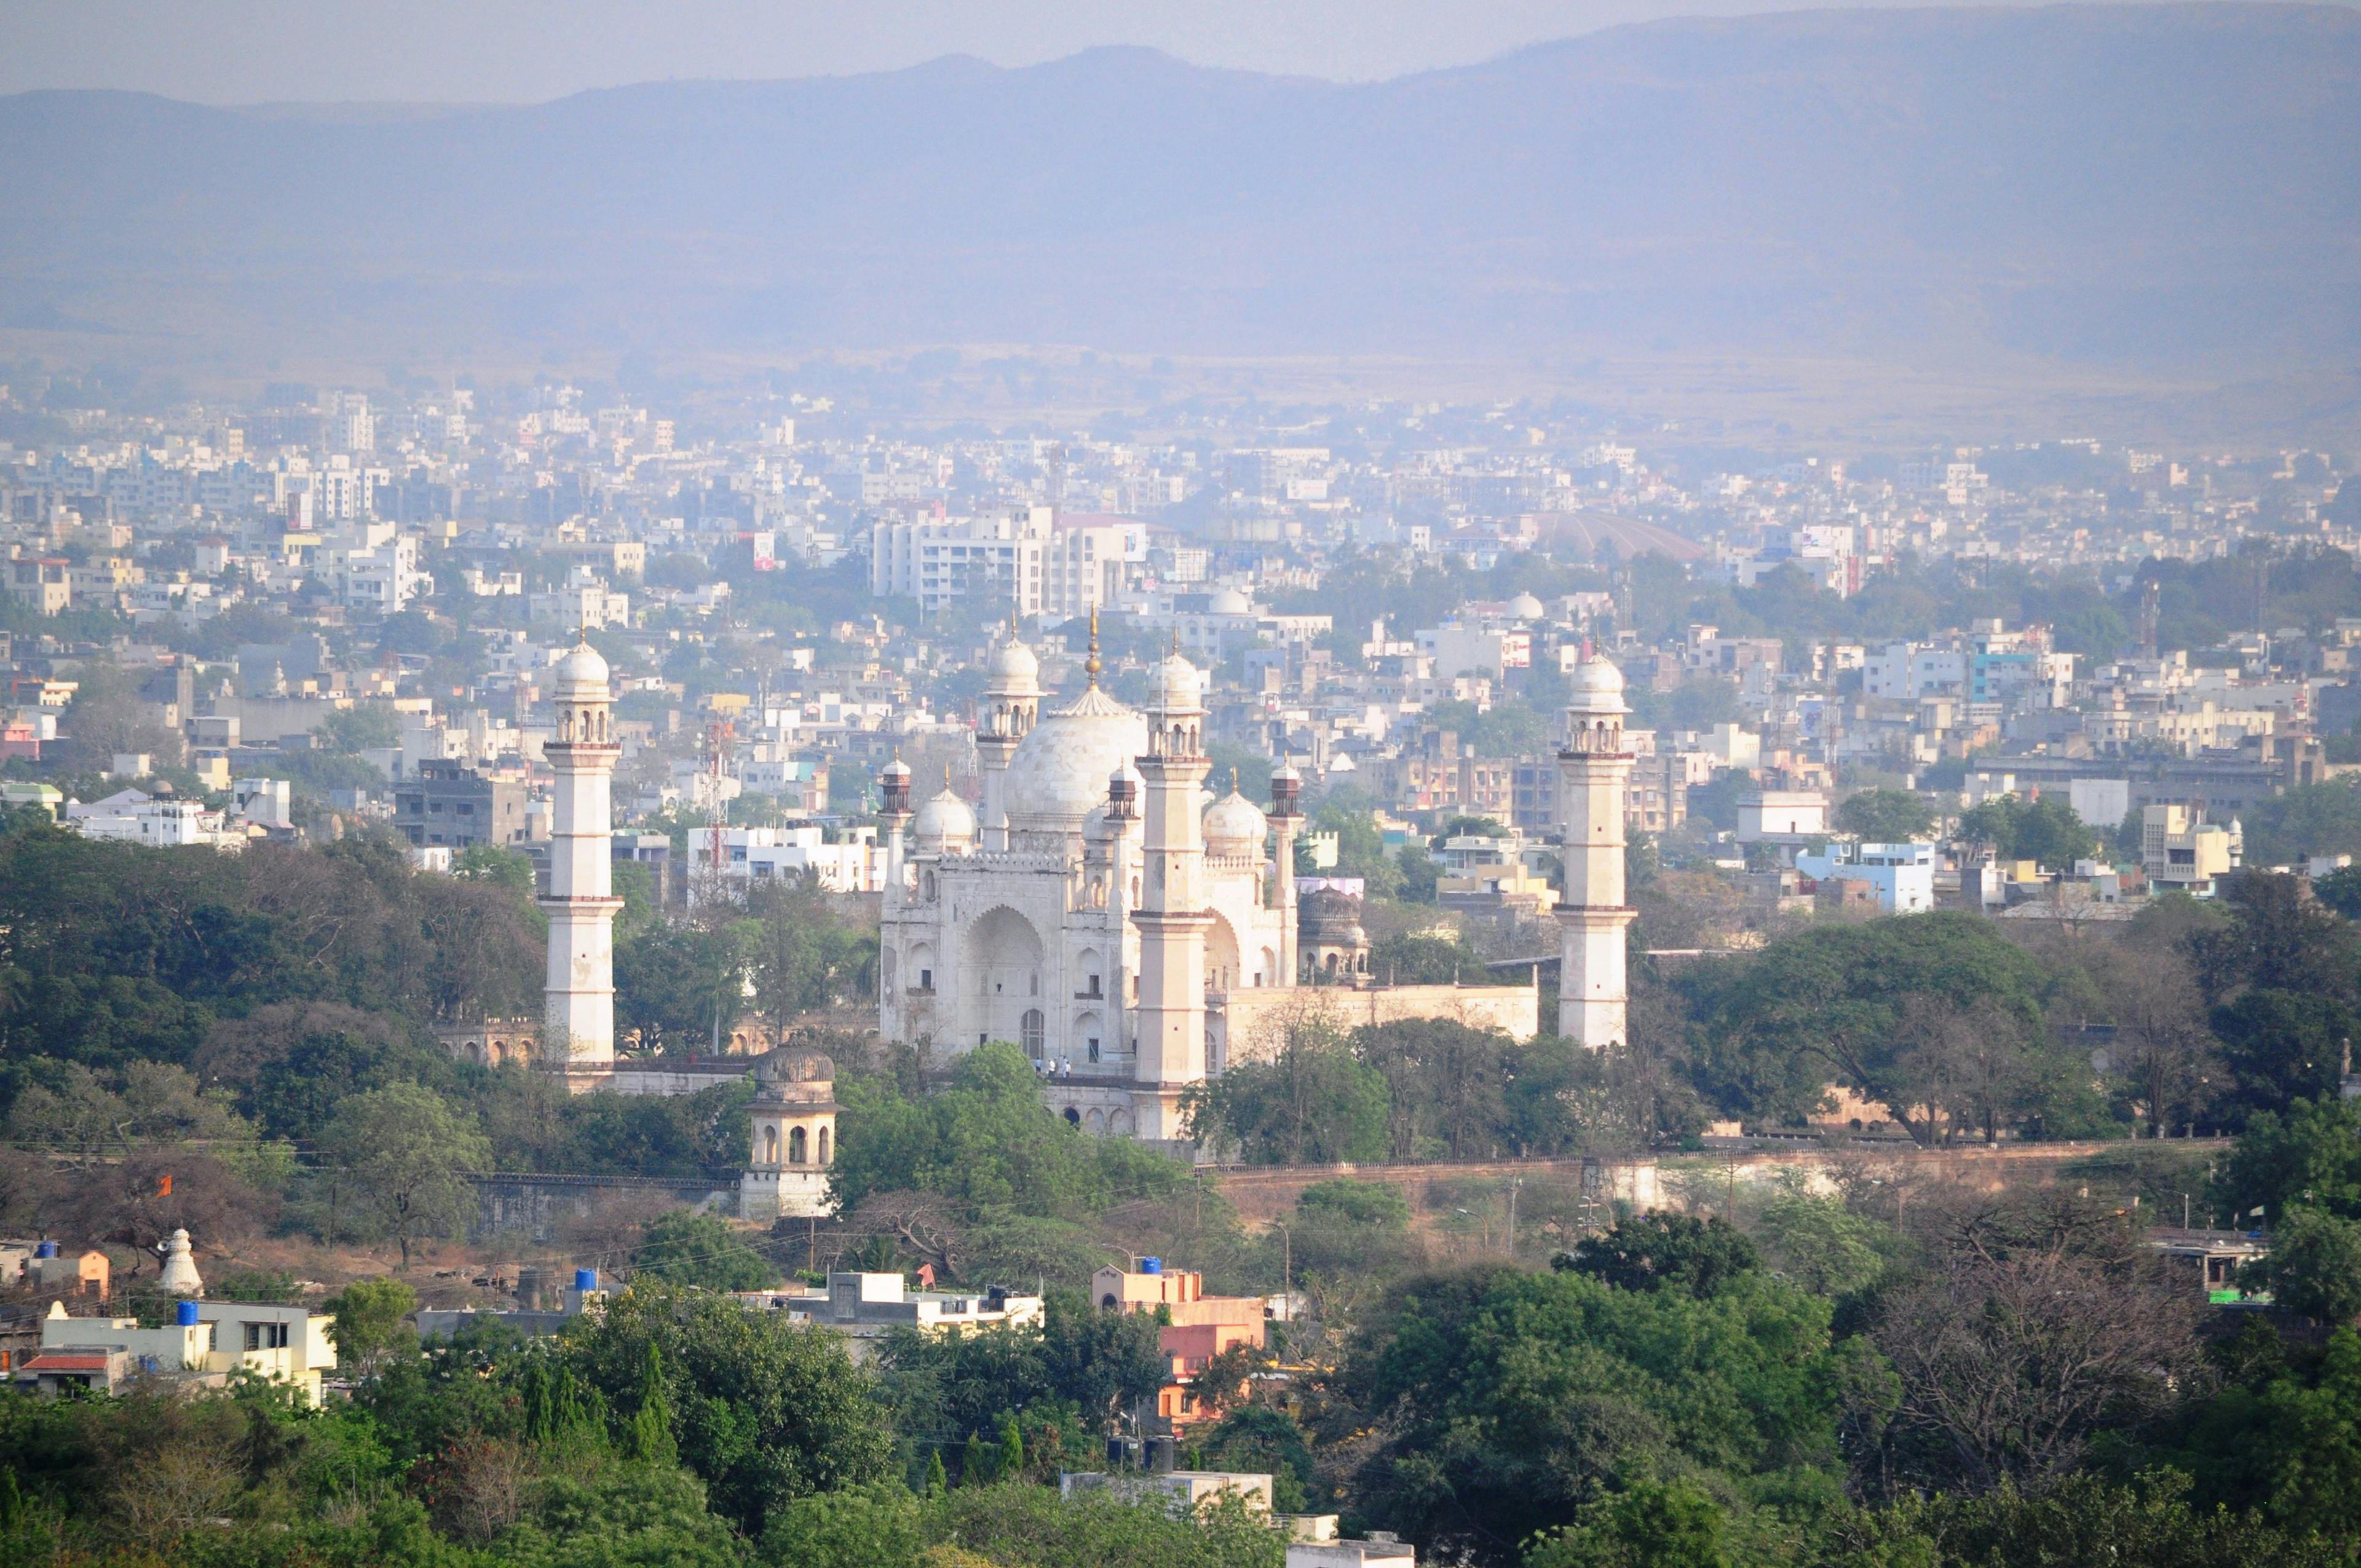 The Maqbara surrounded by the city of Aurangabad